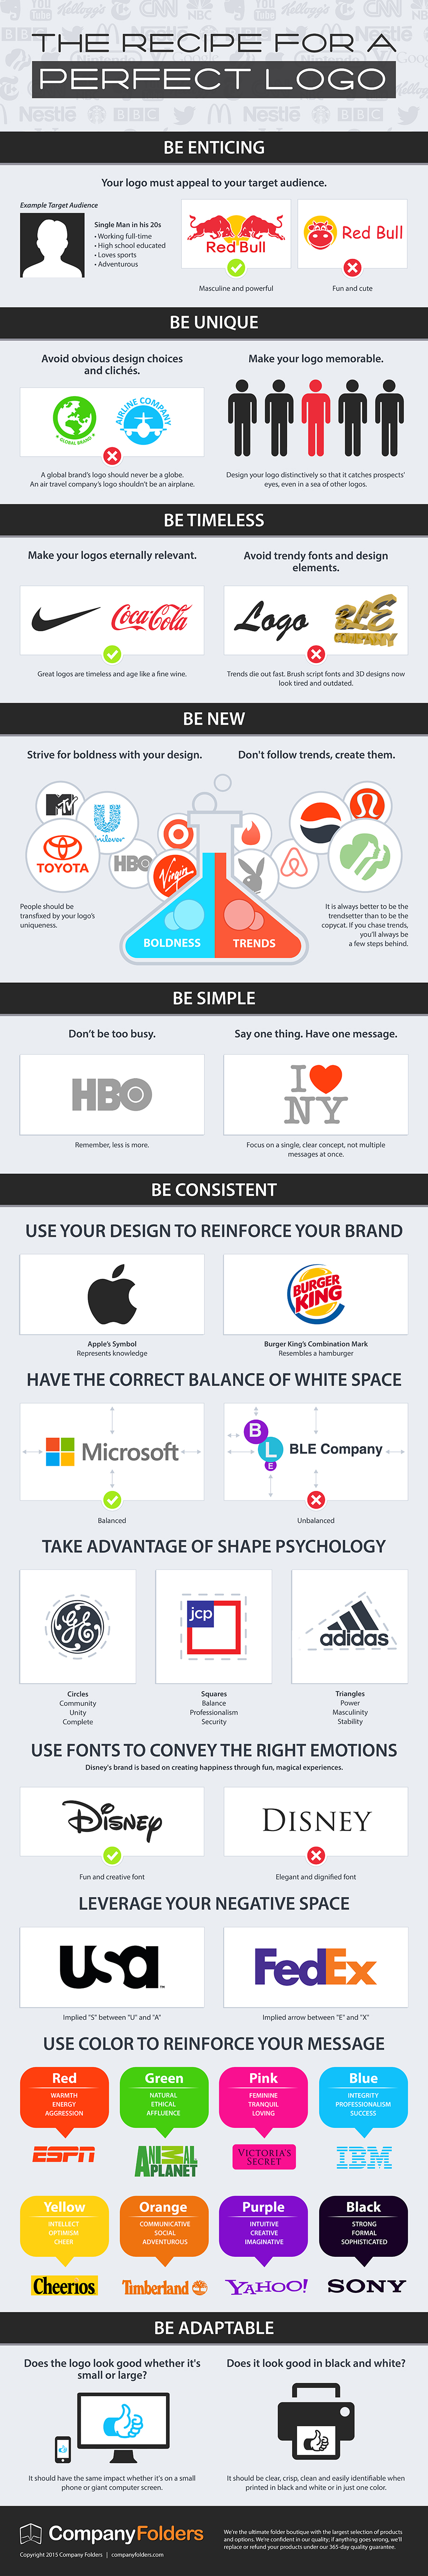 How to Design the Perfect Business Logo #Infographic